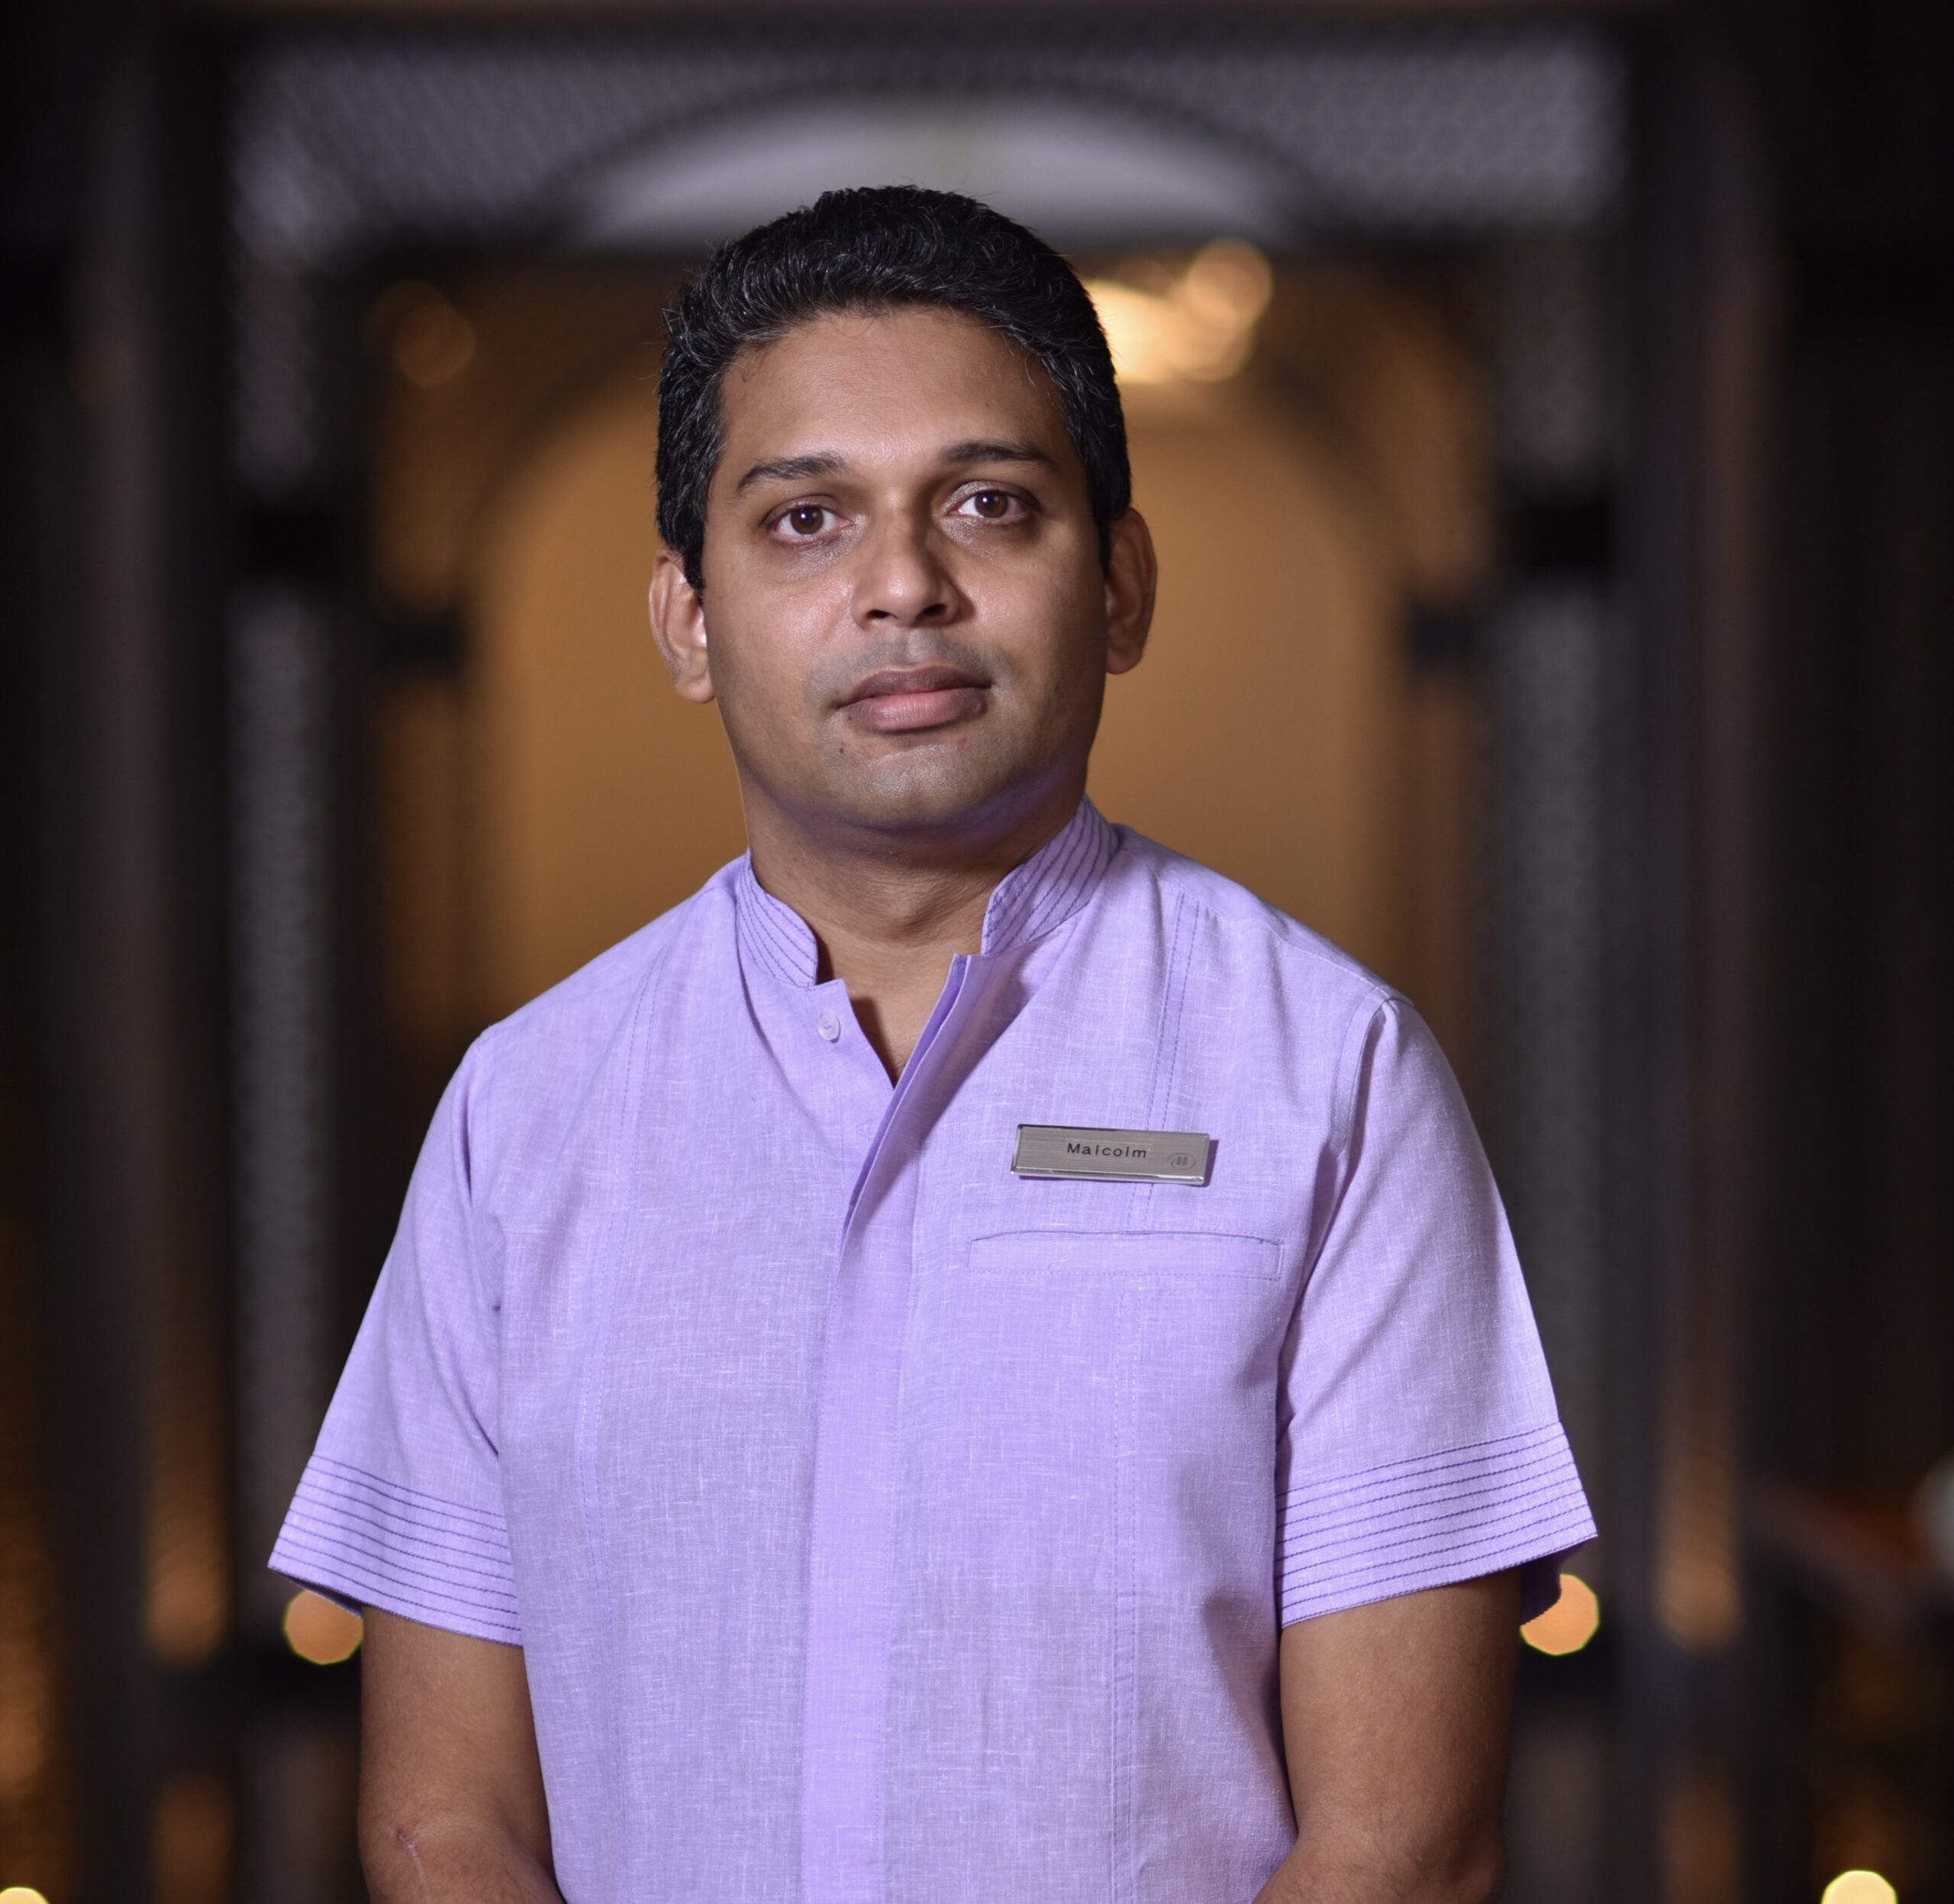 Hilton Goa Resort Expands IT Leadership with Malcolm Moniz as Cluster IT Manager for all three Hilton properties in Goa